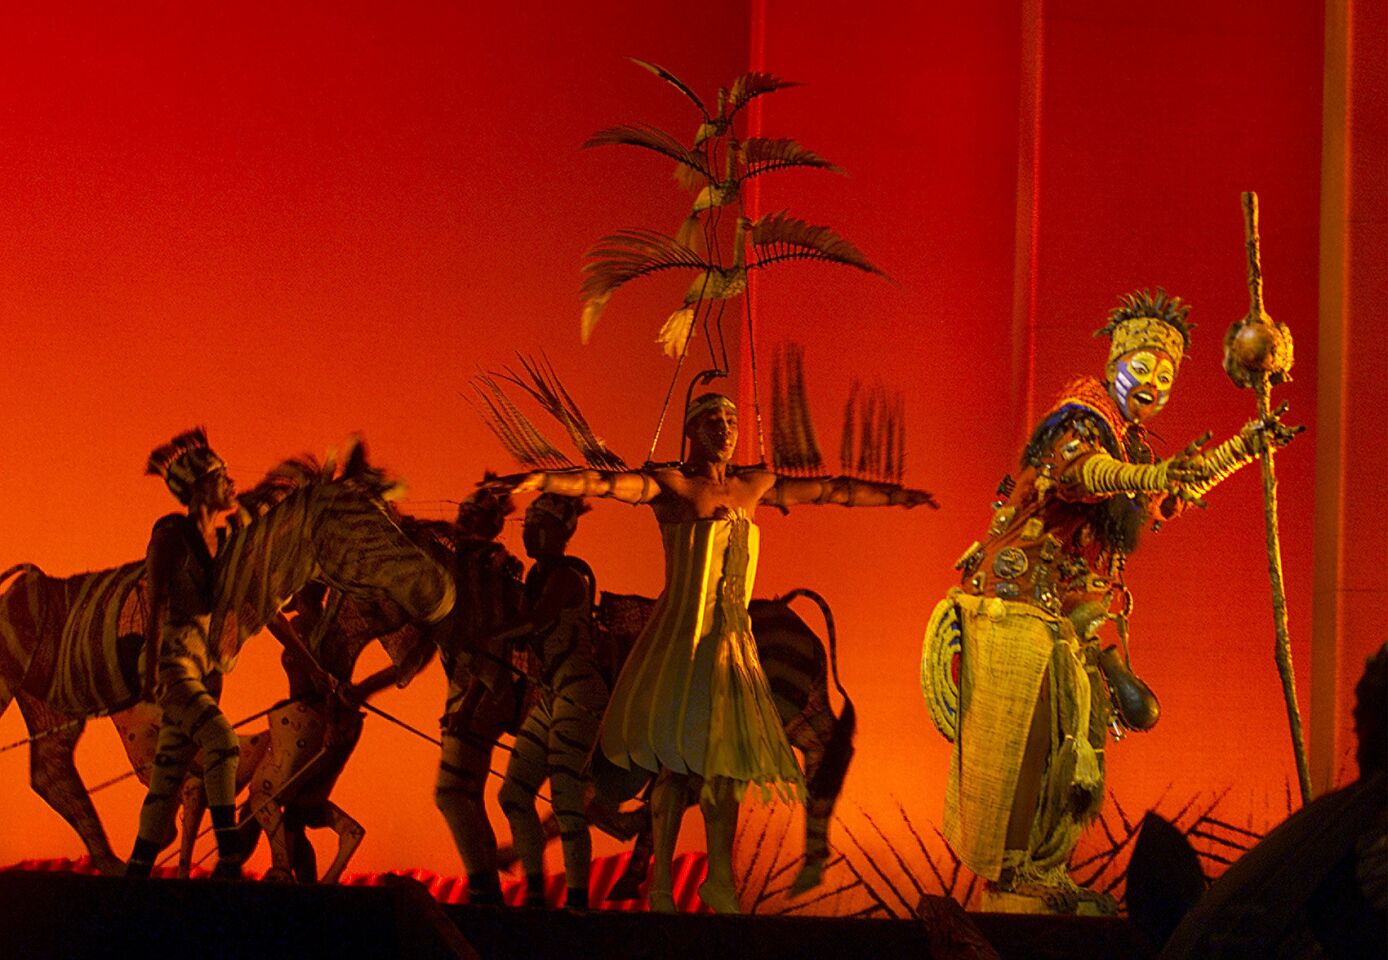 Adapted from 1994's animated Disney film, "The Lion King" has been running on Broadway since 1997 and won six out of its 11 Tony nominations, including for musical. It is currently the fourth longest-running Broadway show of all time and has grossed more than $1 billion.